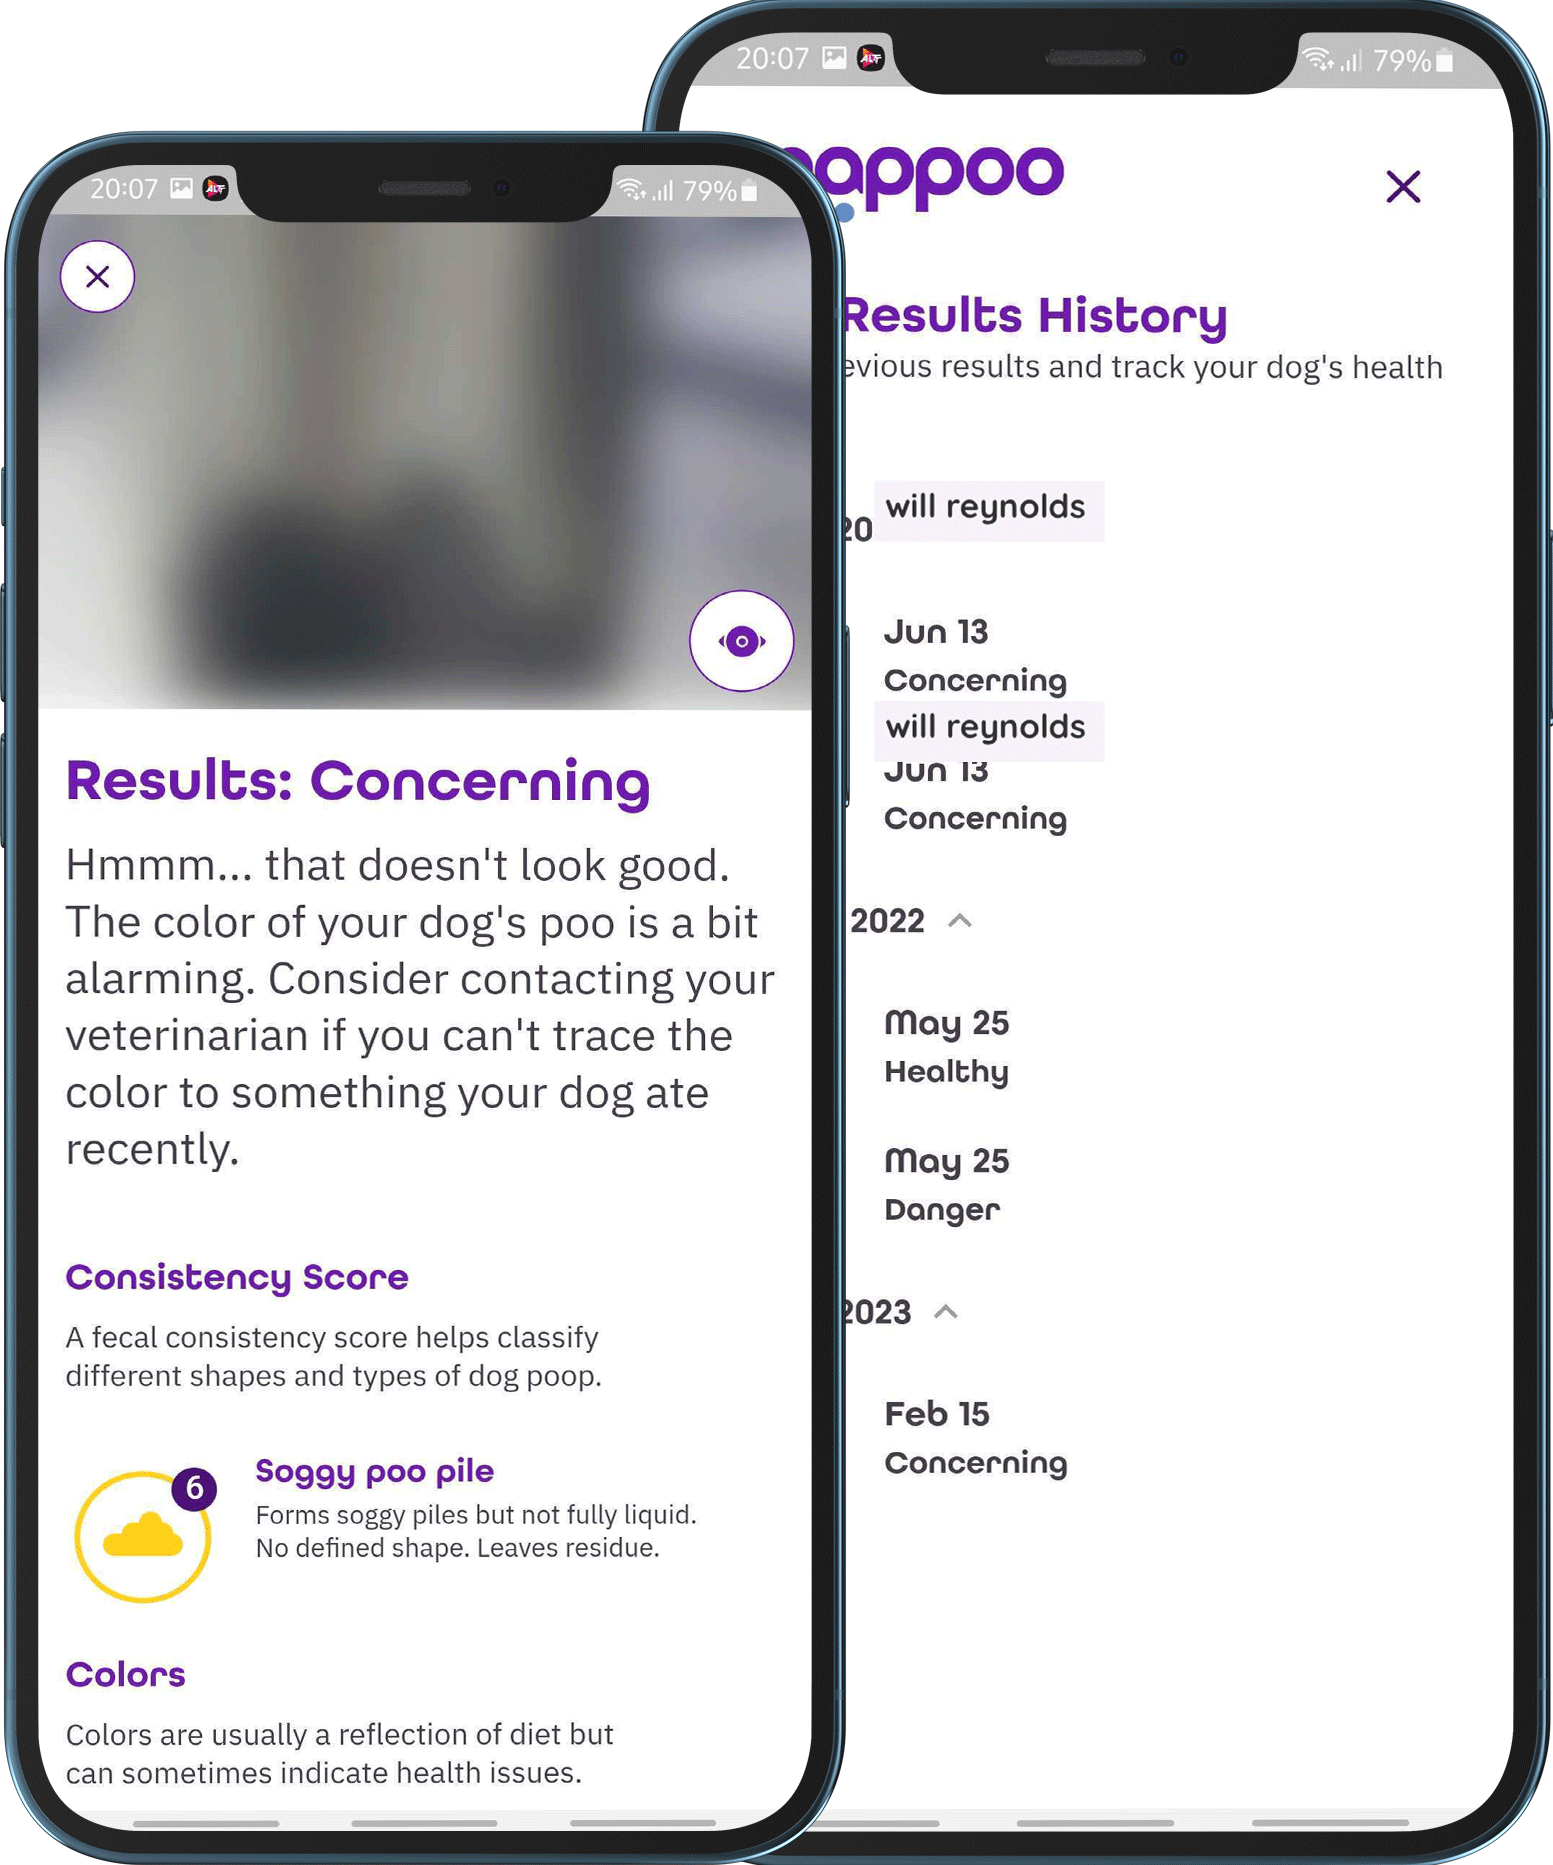 Snappoo Core Features